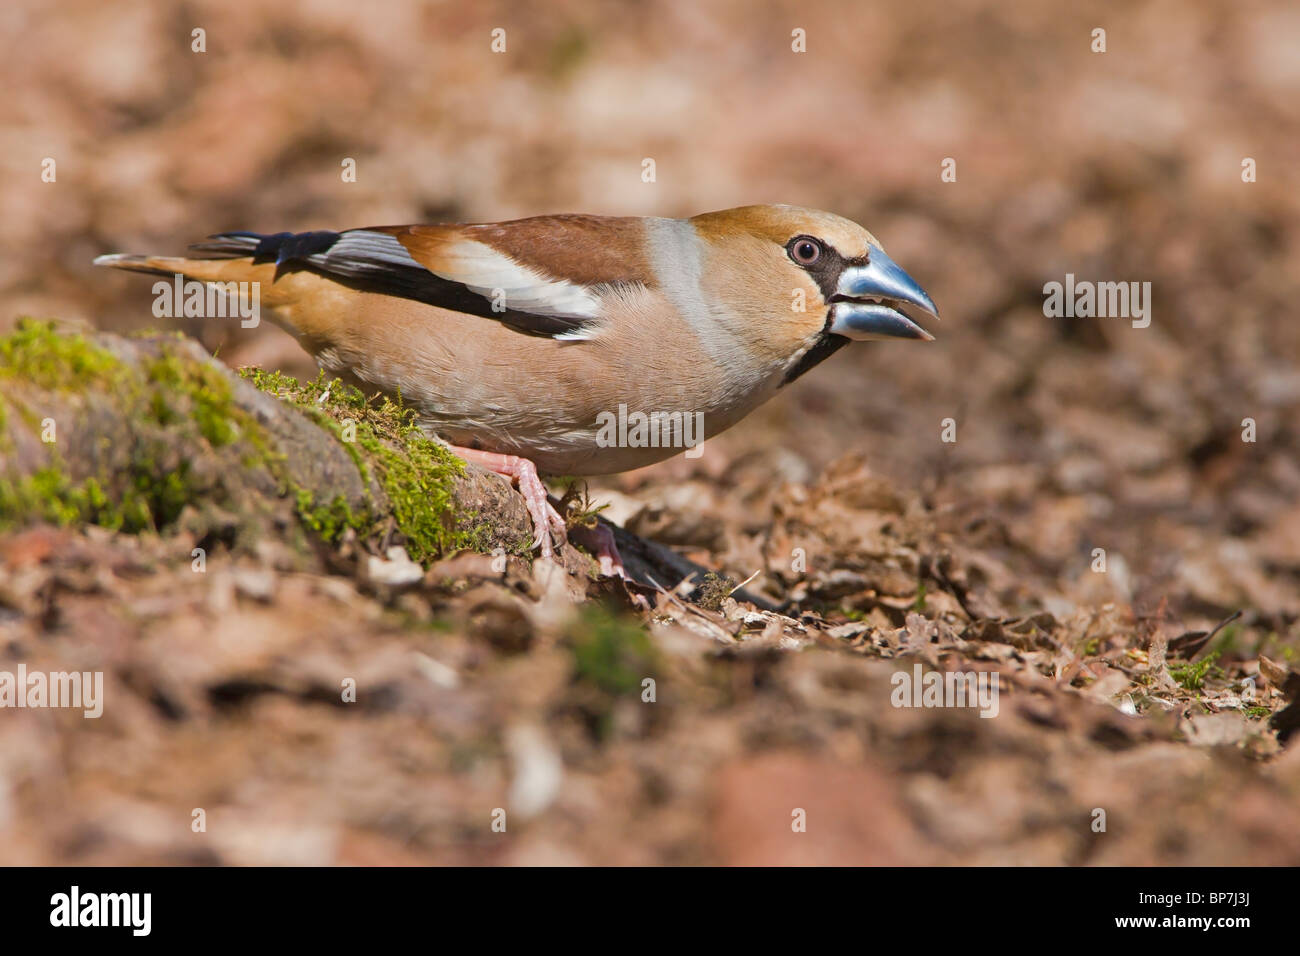 Female Hawfinch on a Hornbeam tree root in leaf litter. Stock Photo